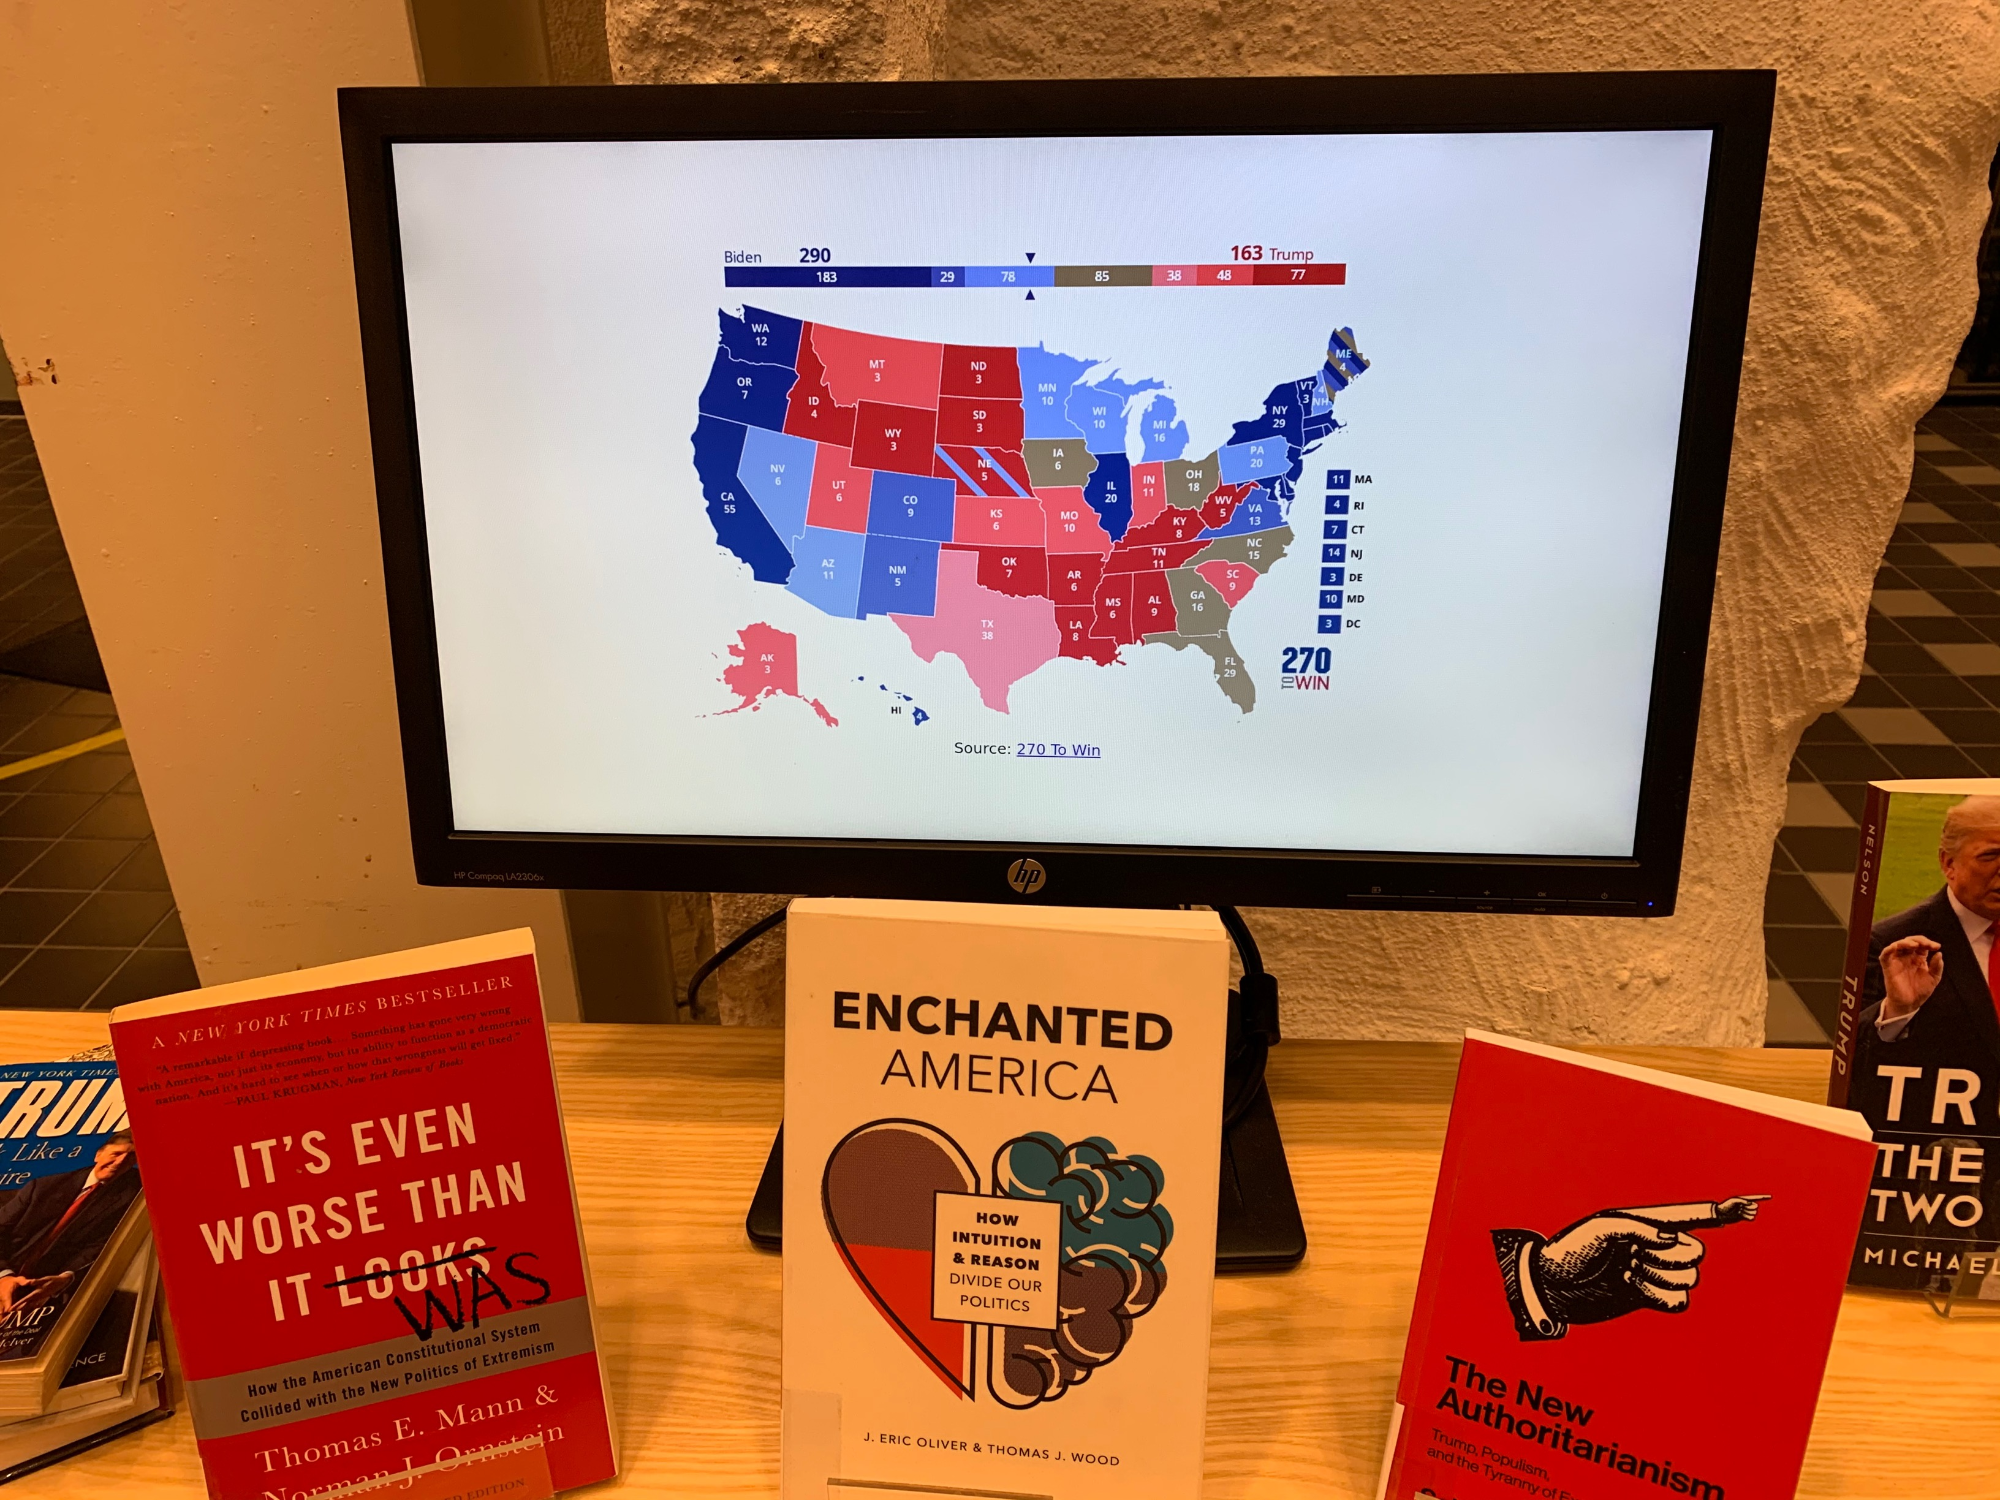 The library's display for the american 2020 election with a computer showing a live election results map and a selection of relevant books.